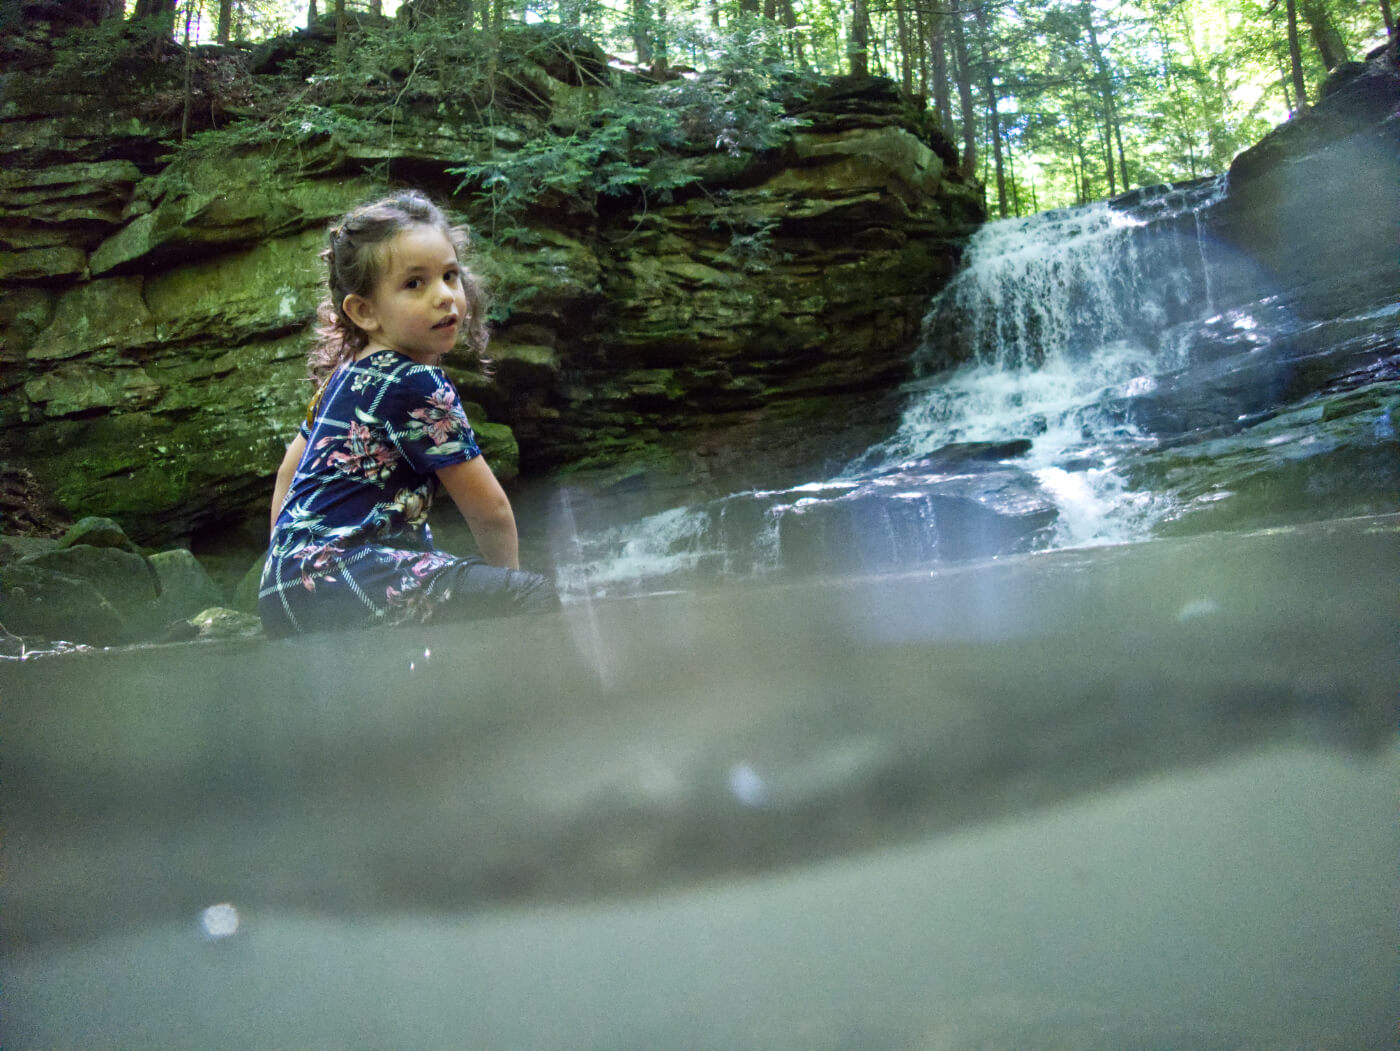 VIDEO: Memorial Day Weekend at Dundee Falls and Honey Run State Park